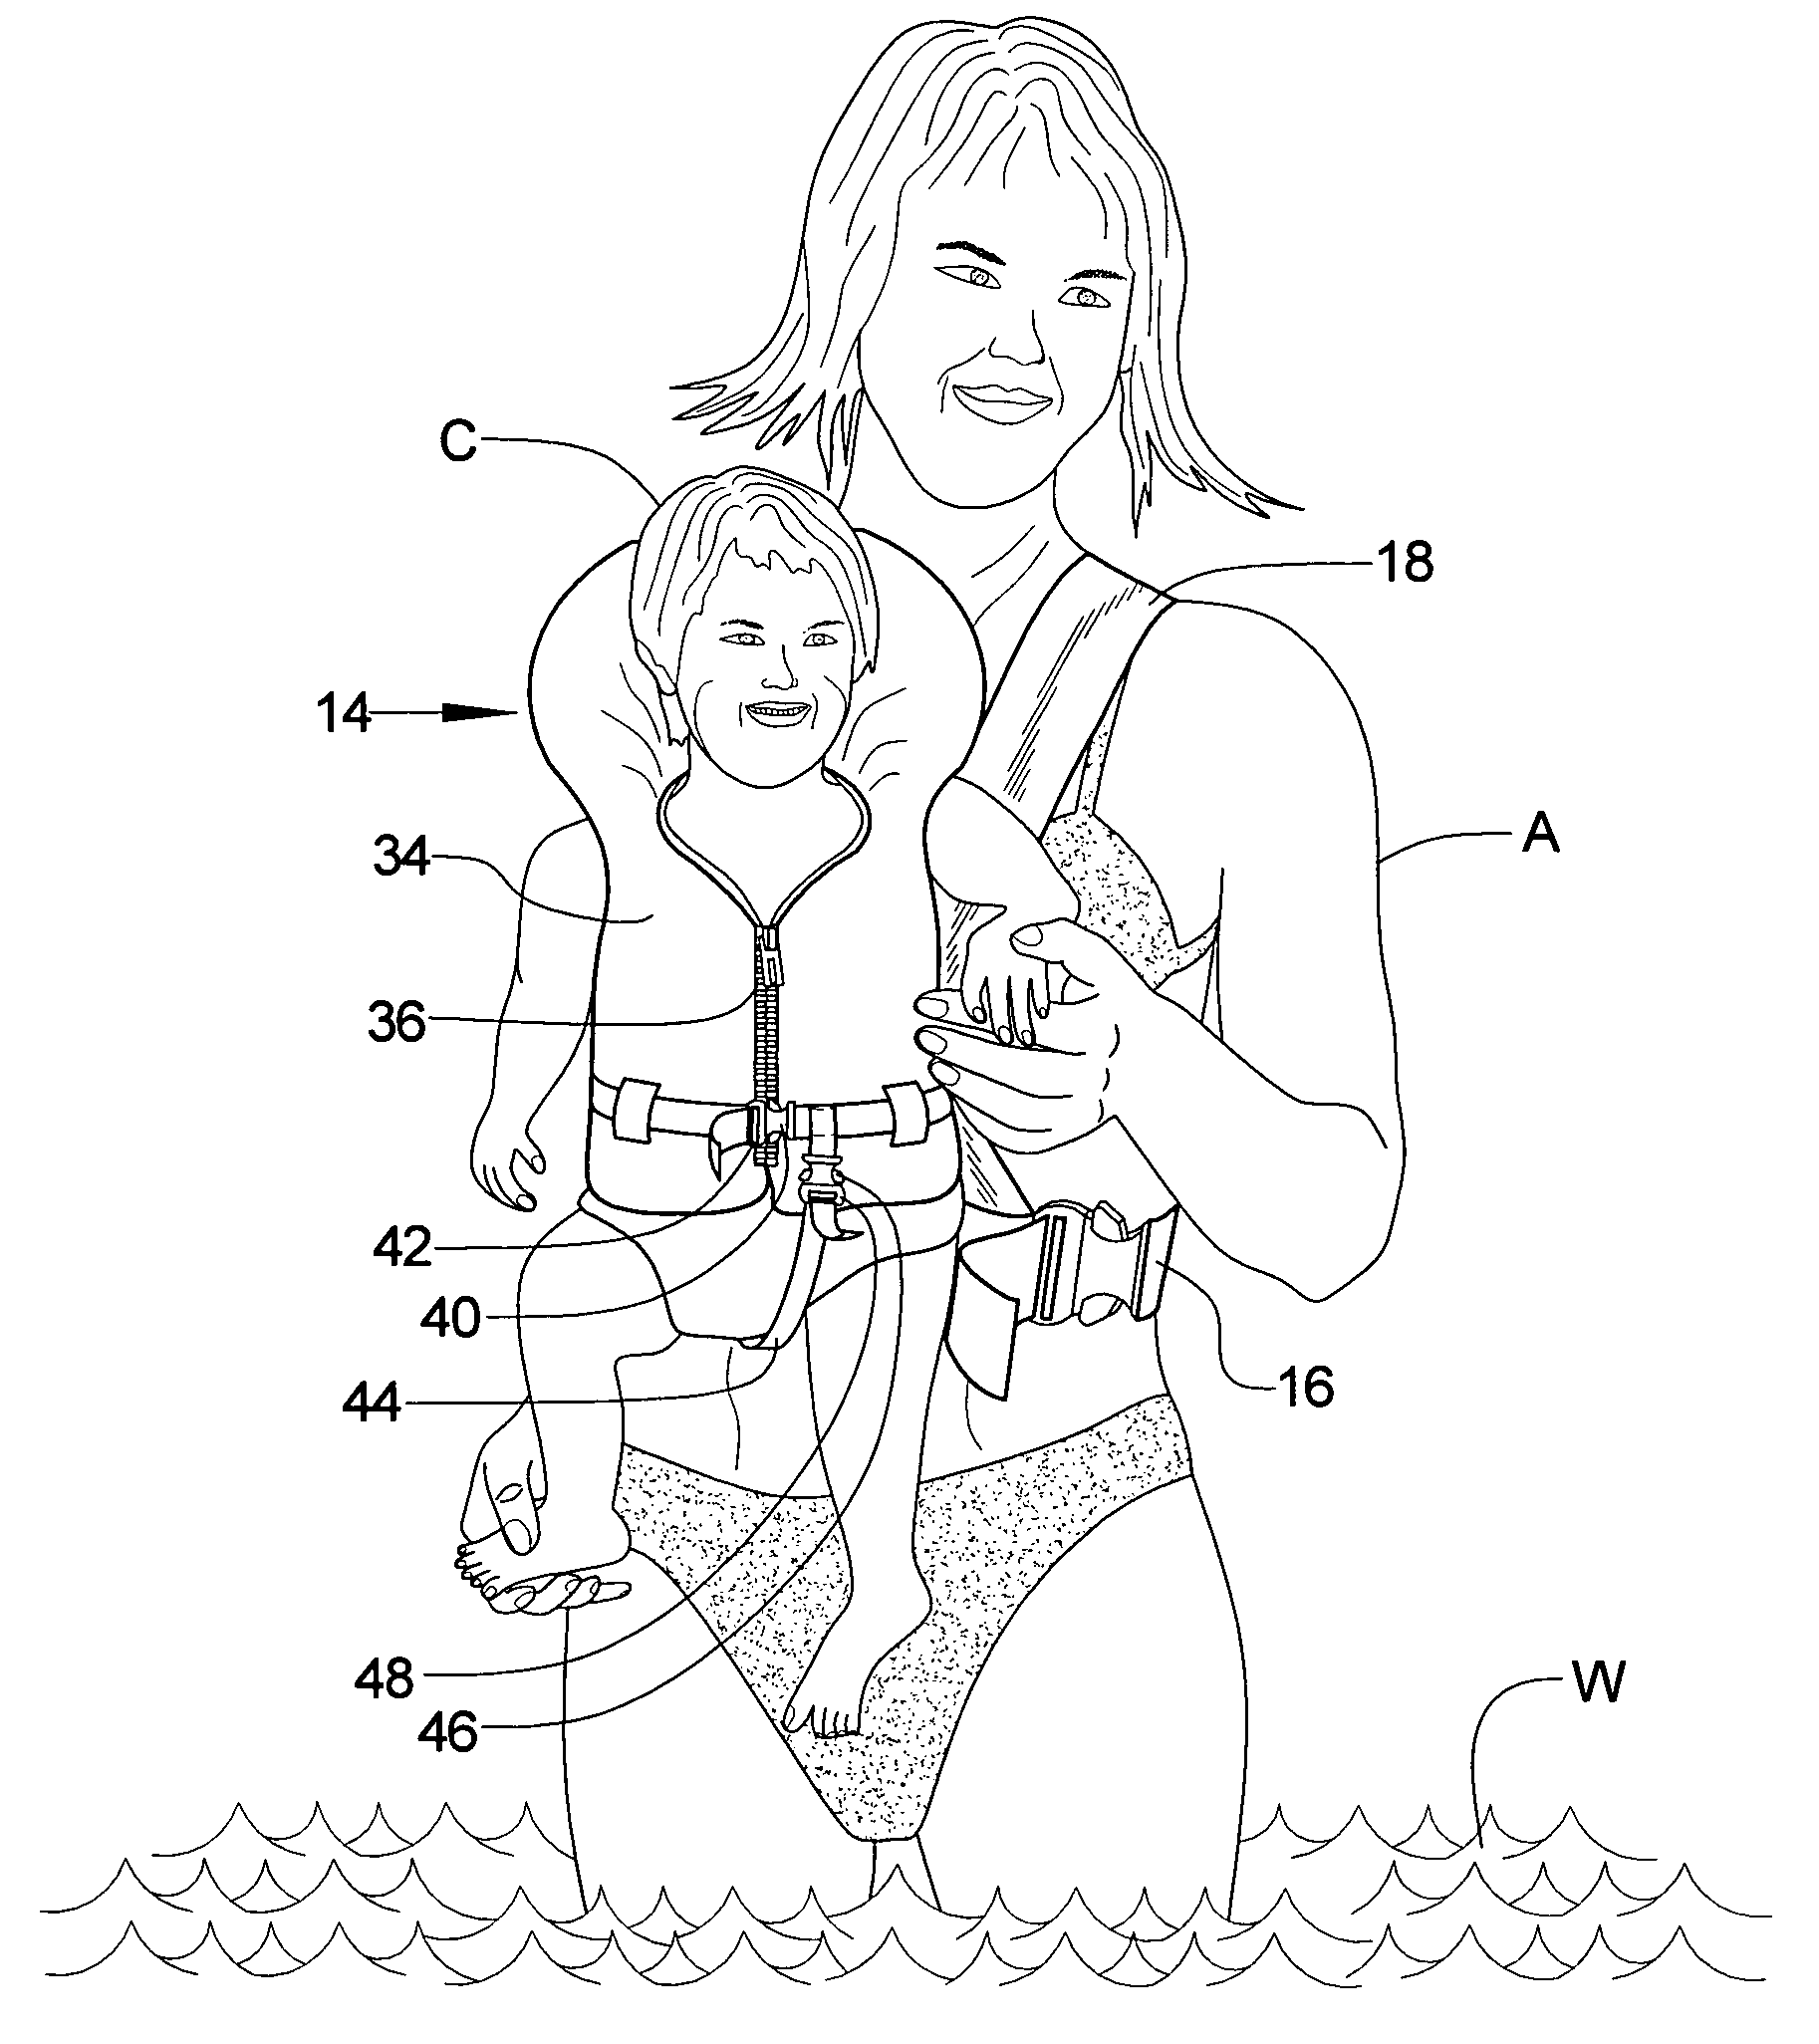 Child carrier and swimming aid